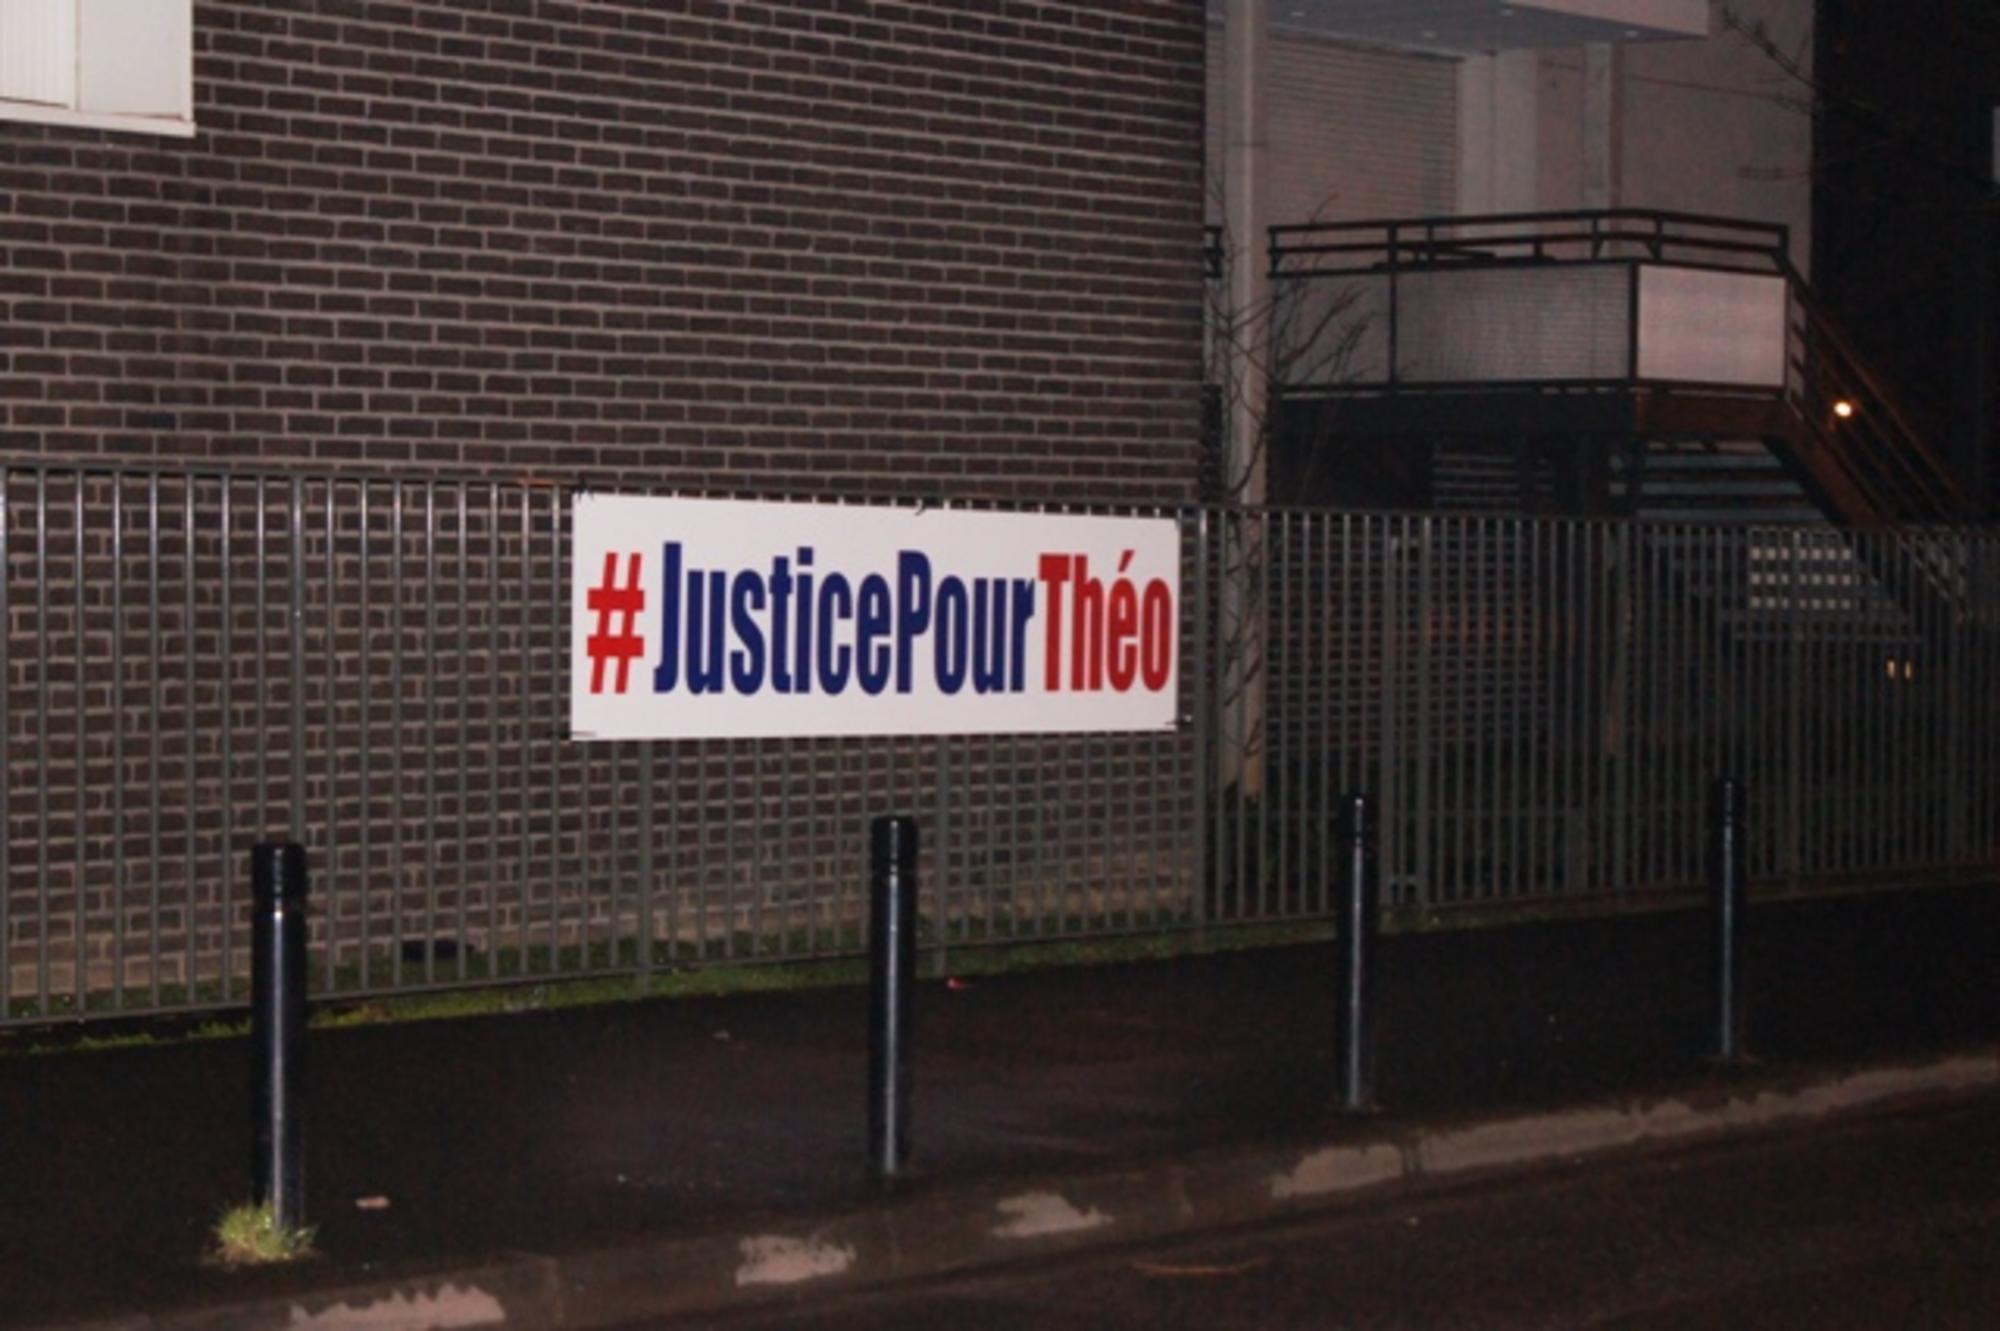 Justice Pour Theo